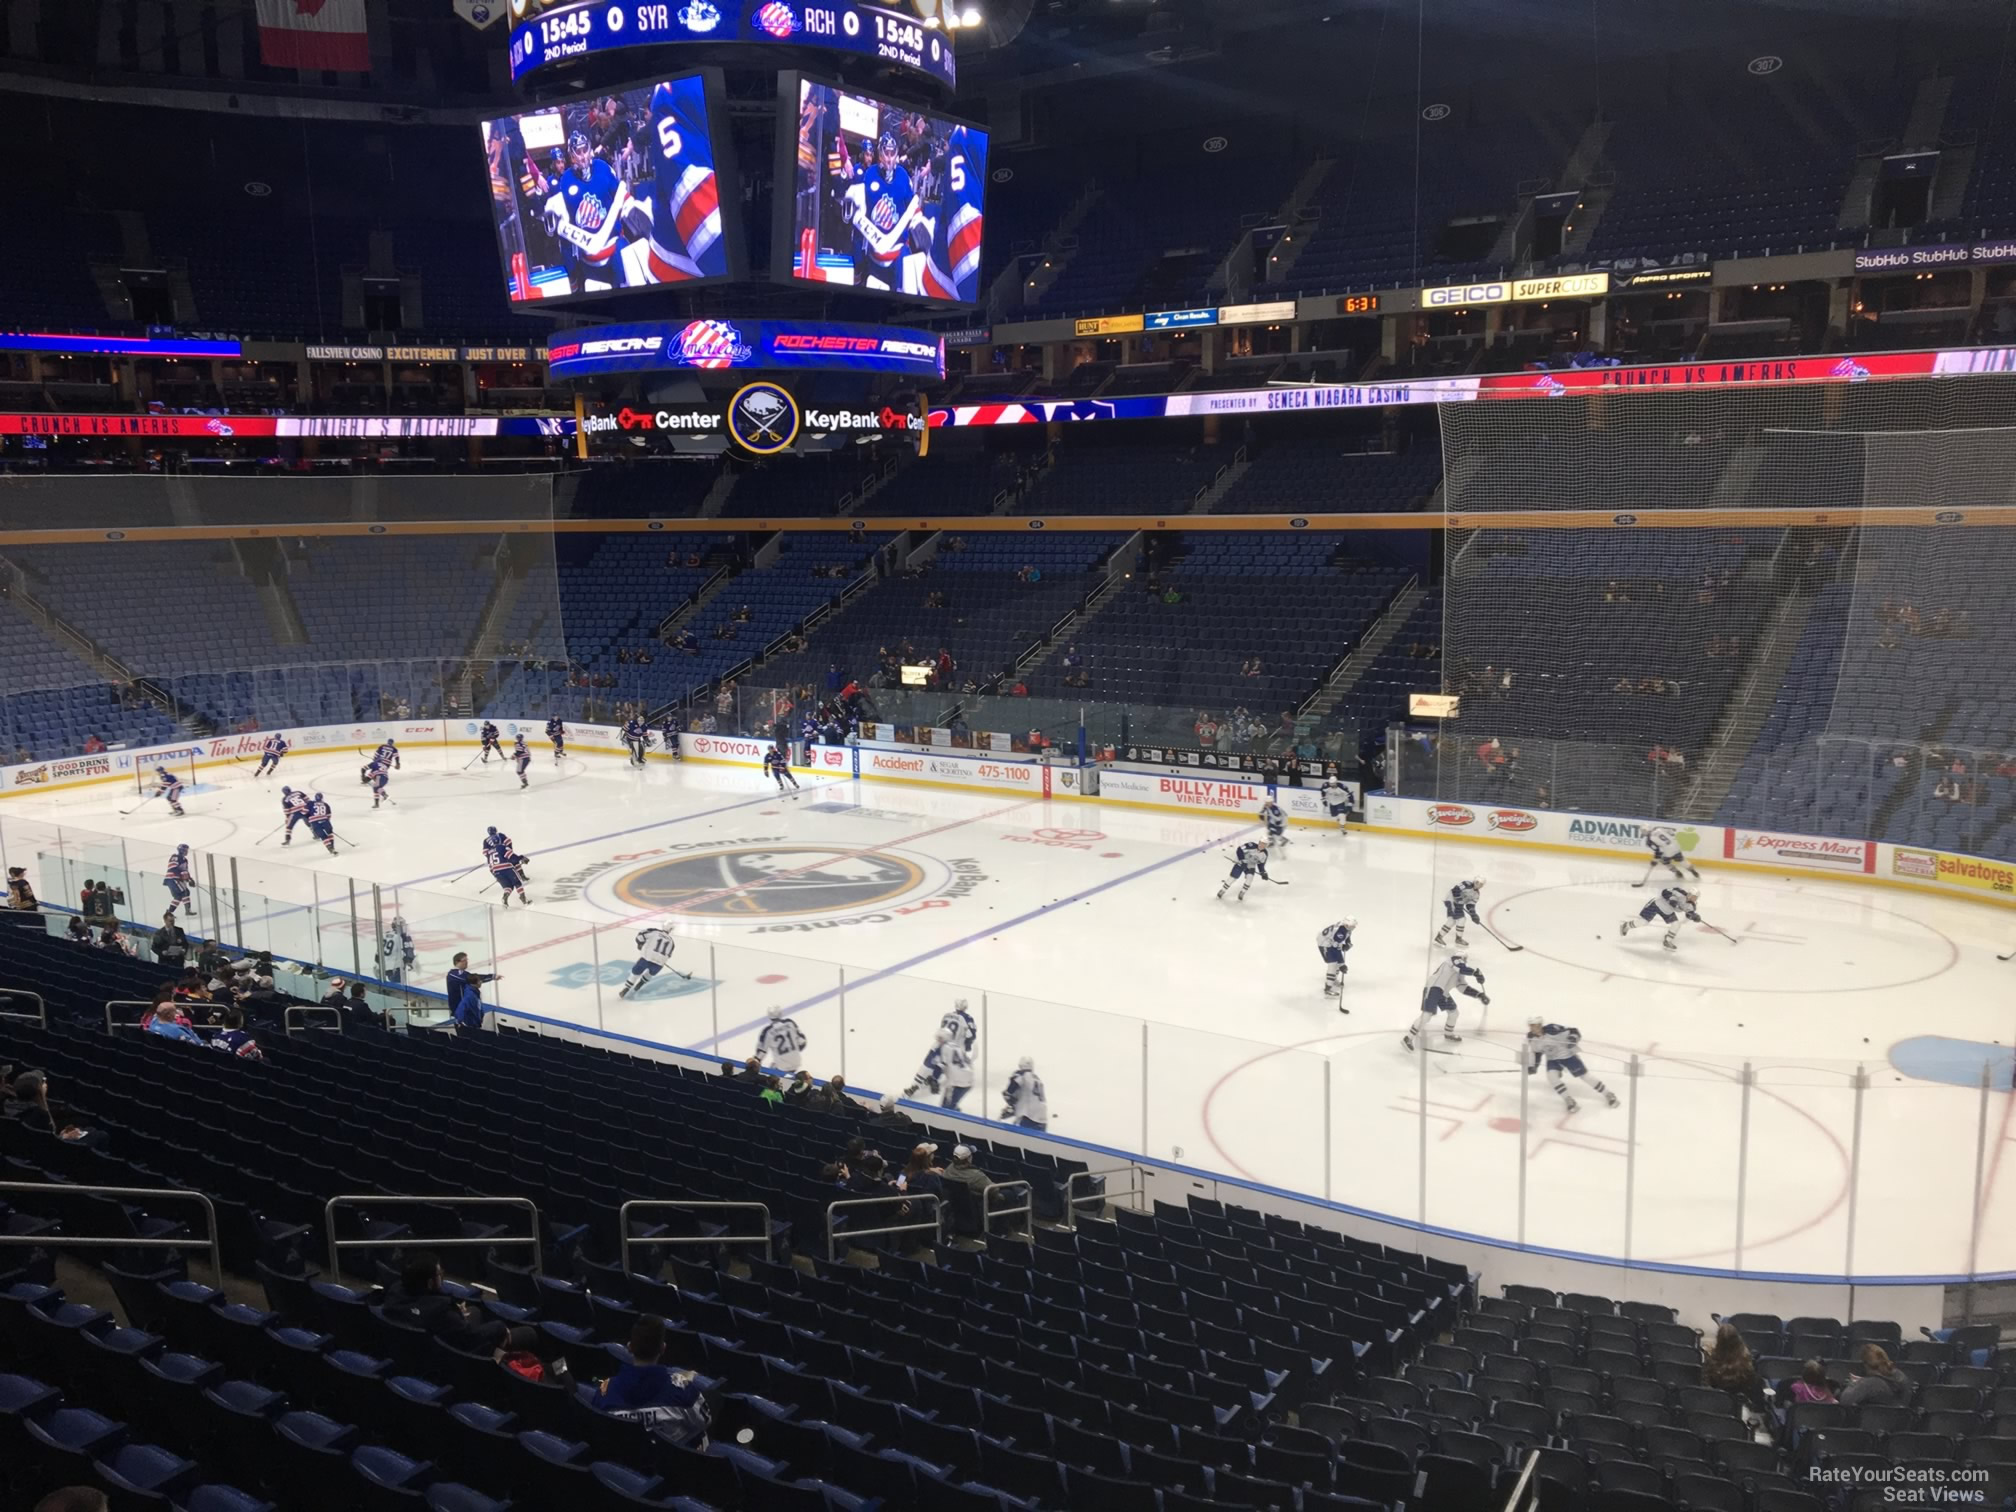 section 215, row 4 seat view  for hockey - keybank center